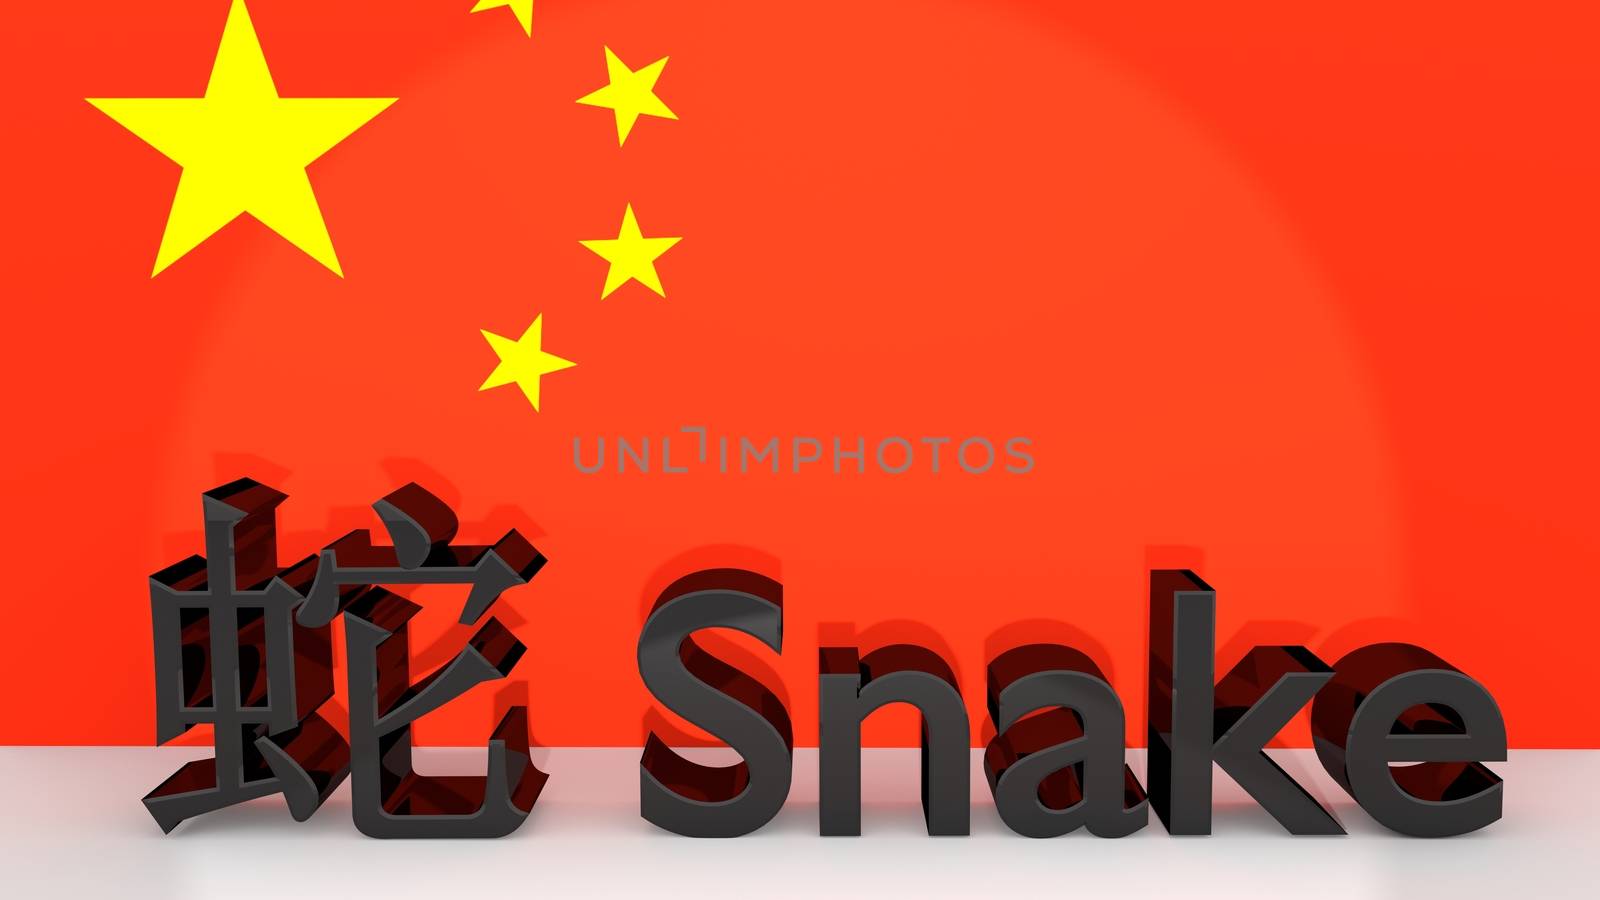 Chinese characters for the zodiac sign Snake with english translation made of dark metal in front on a chinese flag.